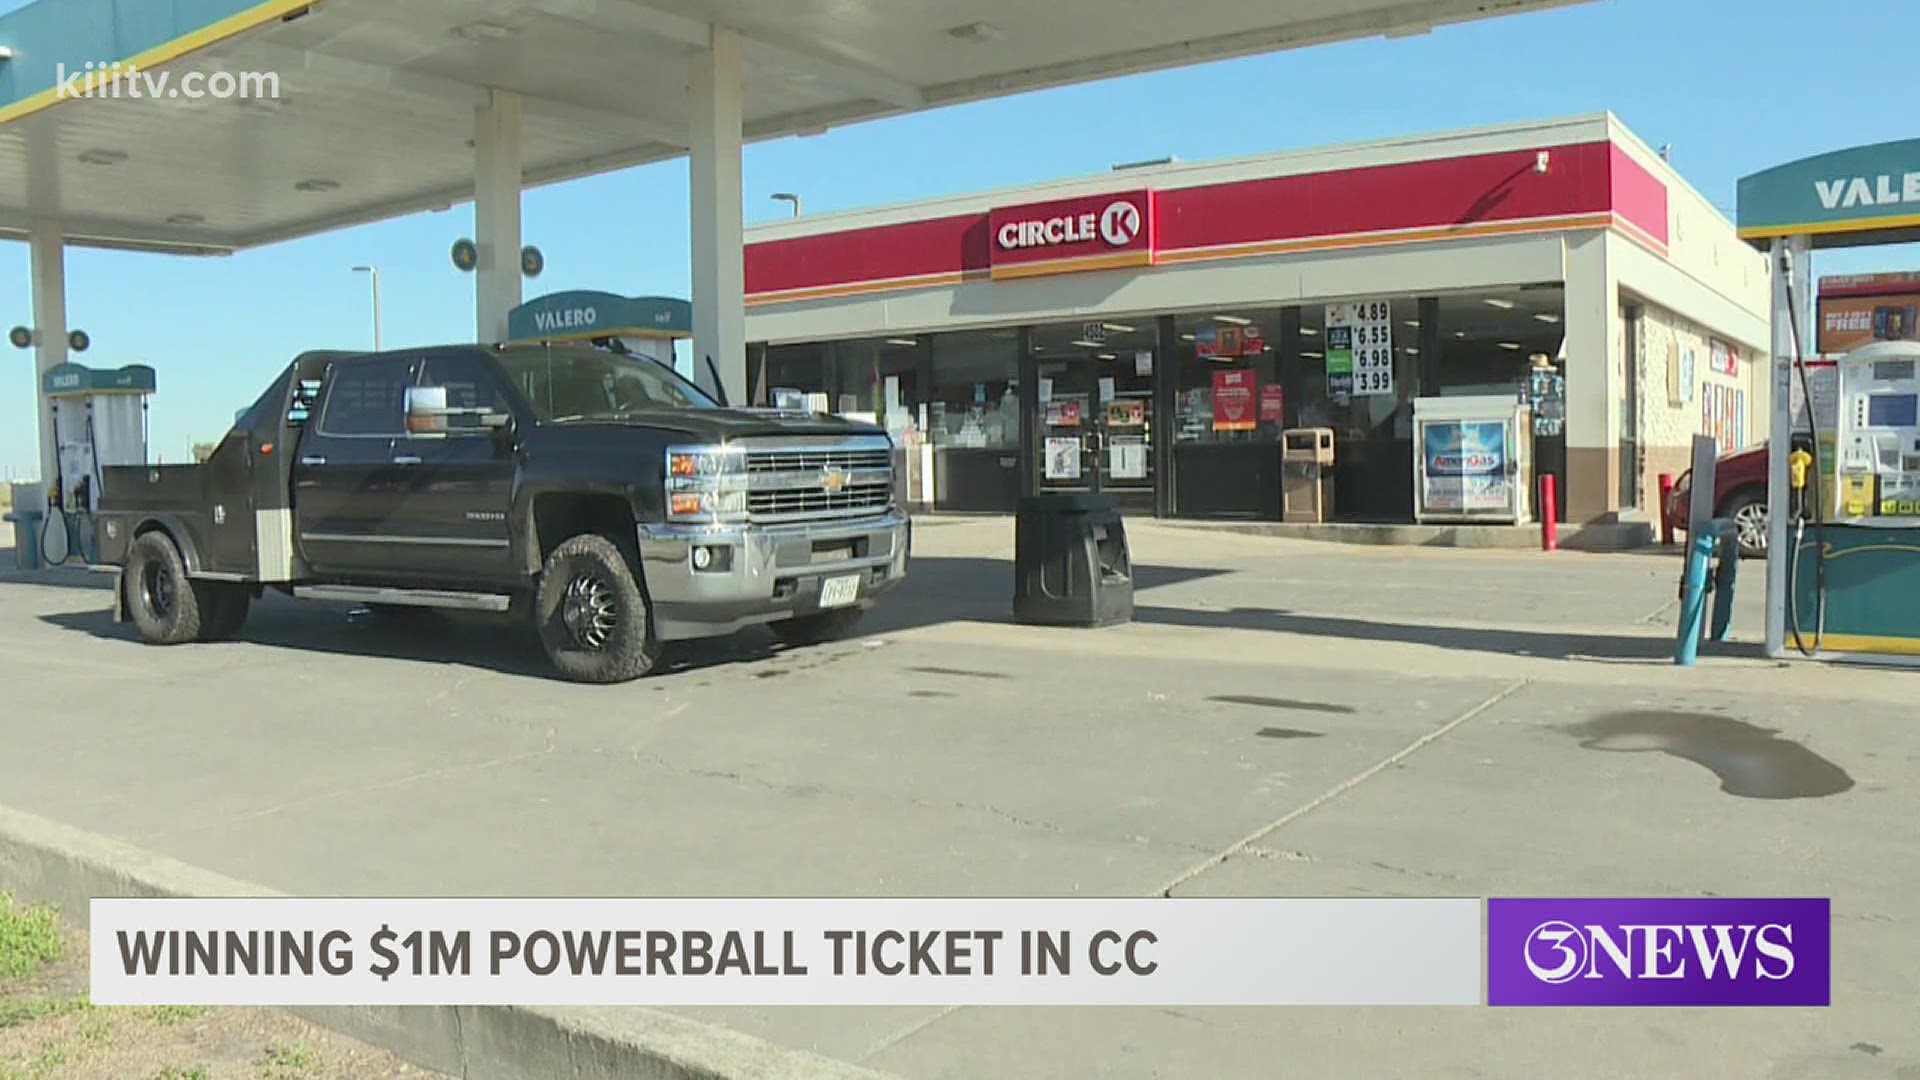 Texas Lottery says two tickets worth $1 million were sold in Texas, in Corpus Christi and in Waco.